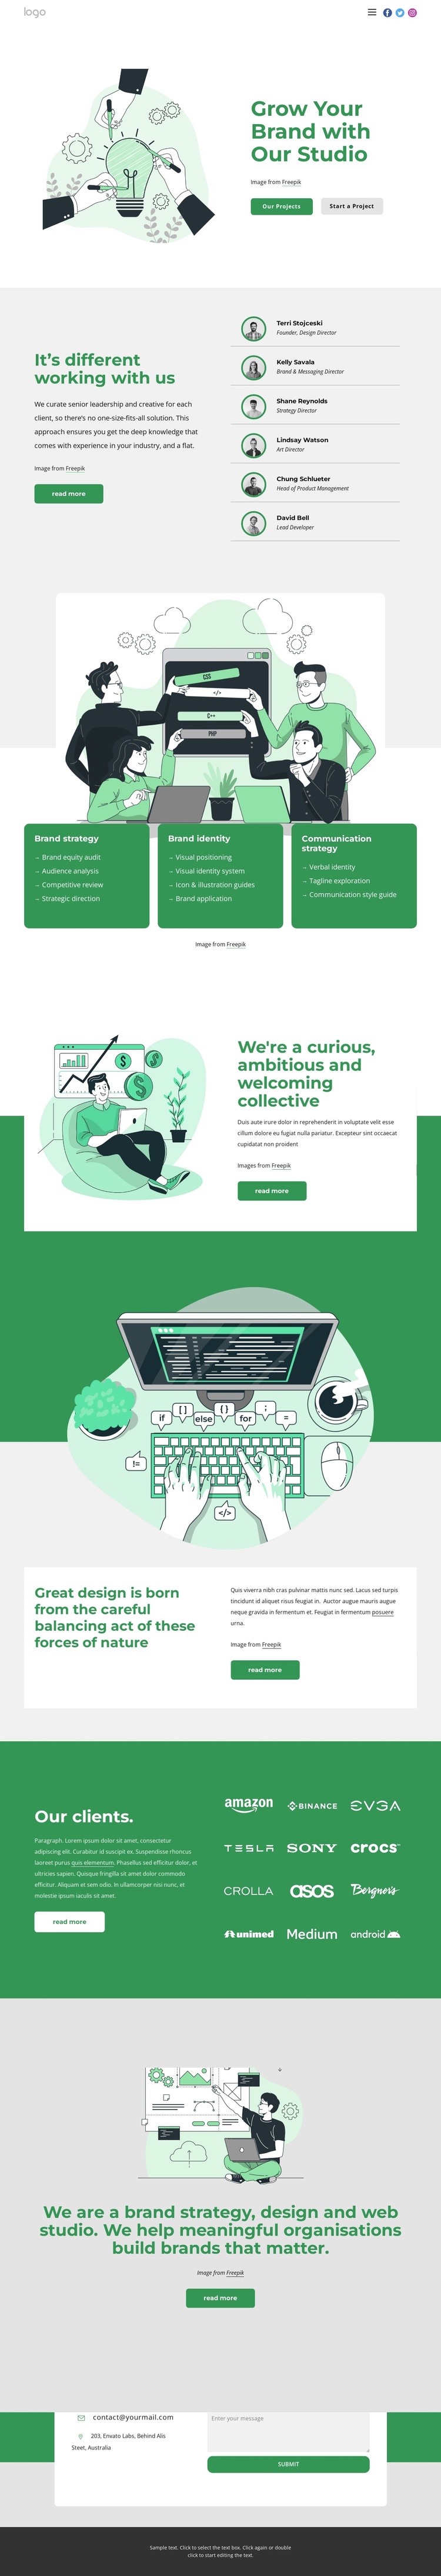 Grow your brand with our studio Joomla Template